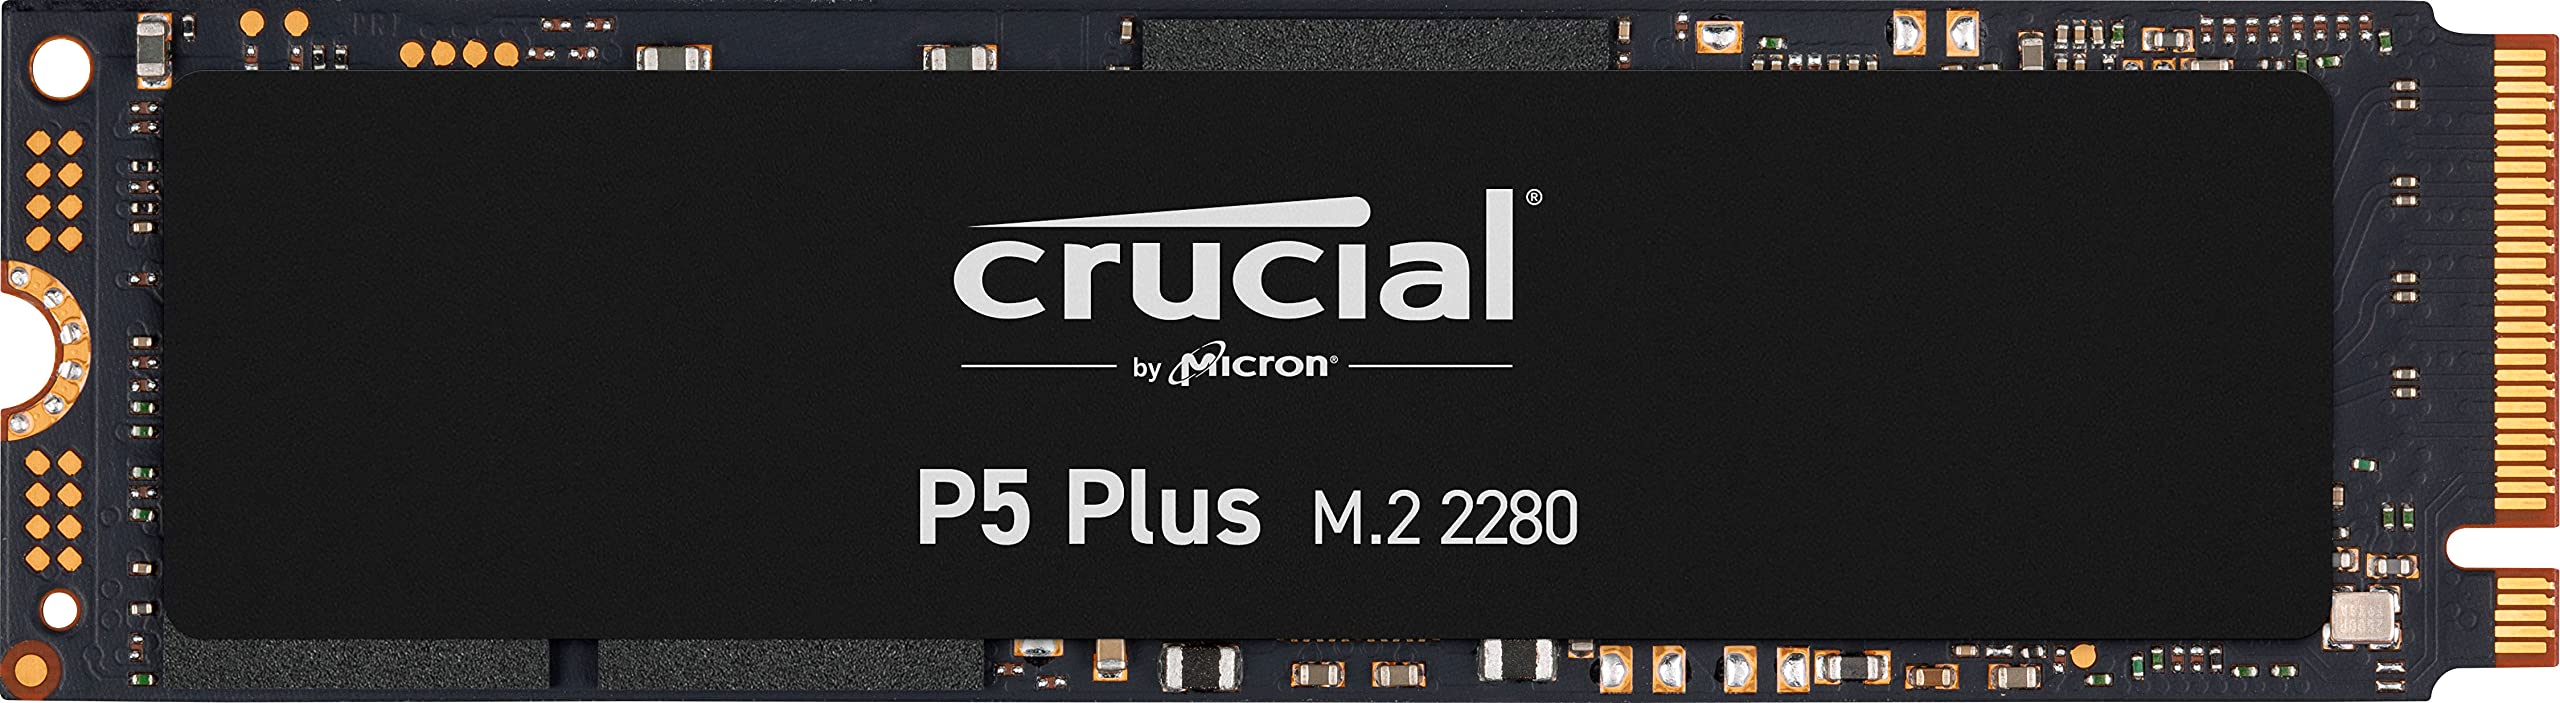 1TB Crucial P5 Plus PCIe Gen 4 x4 NVMe Solid State Drive - $64.99 + F/S - Amazon